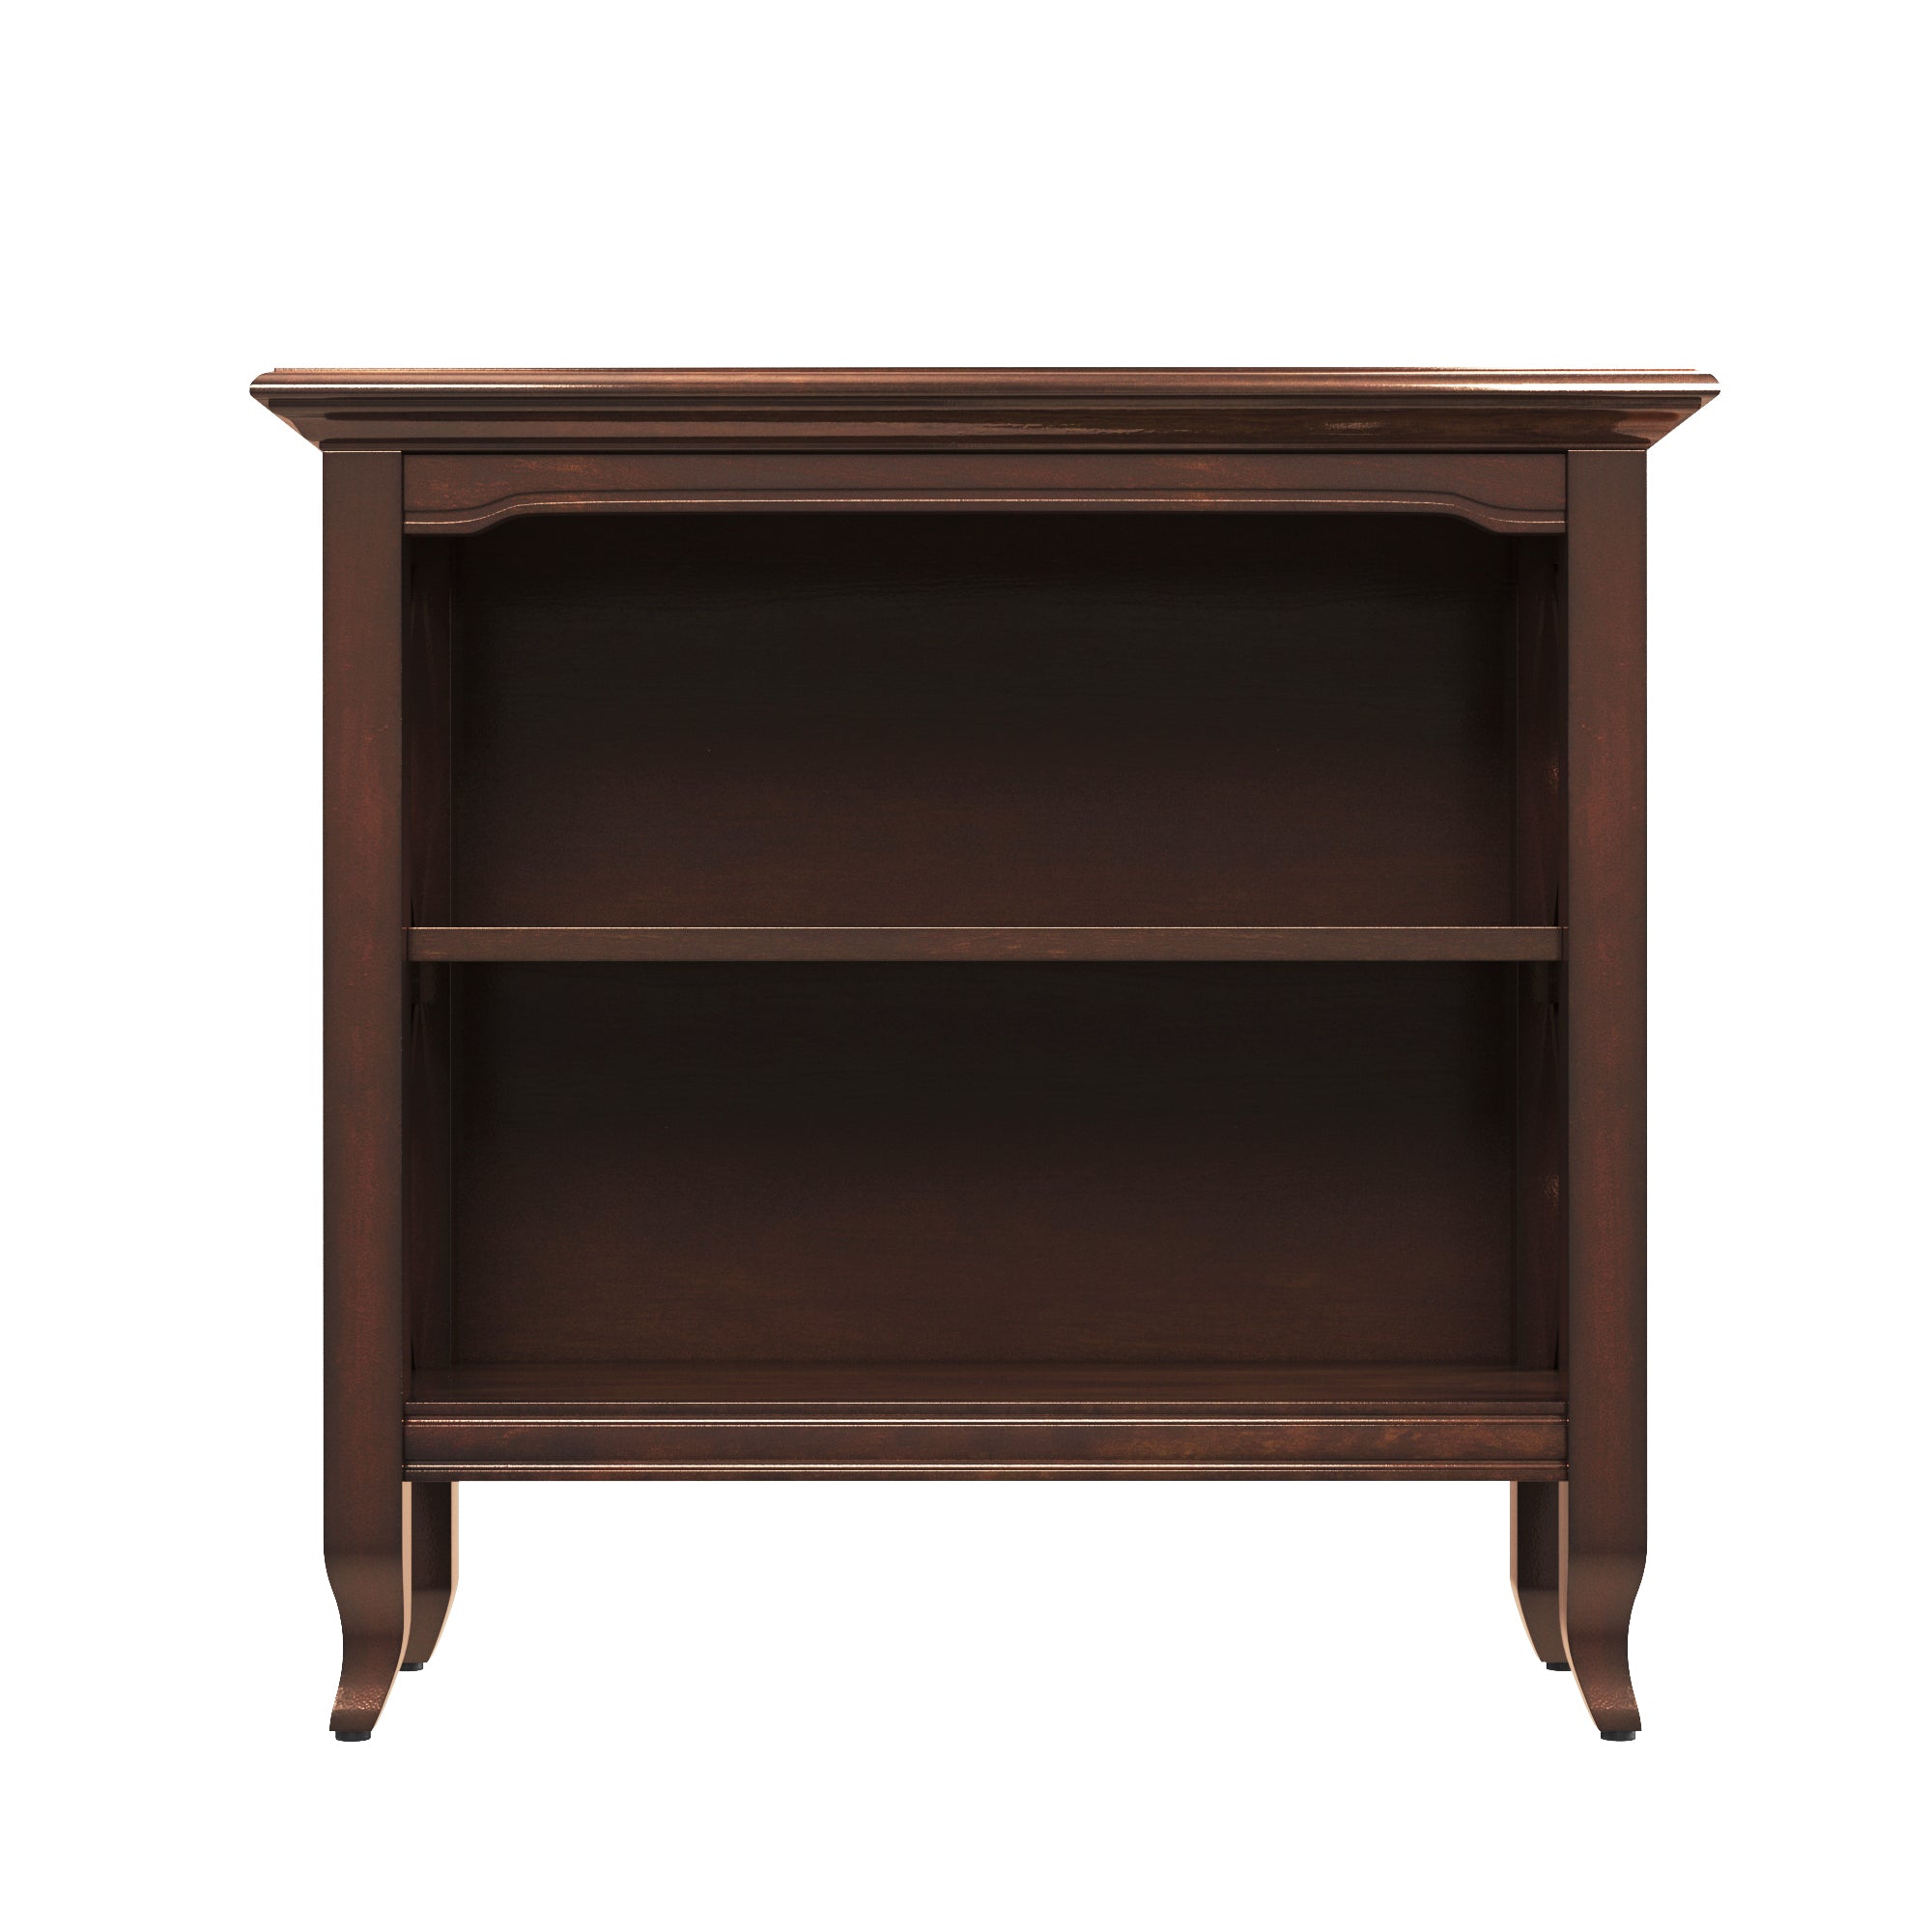 30" Brown Two Tier Standard Bookcase